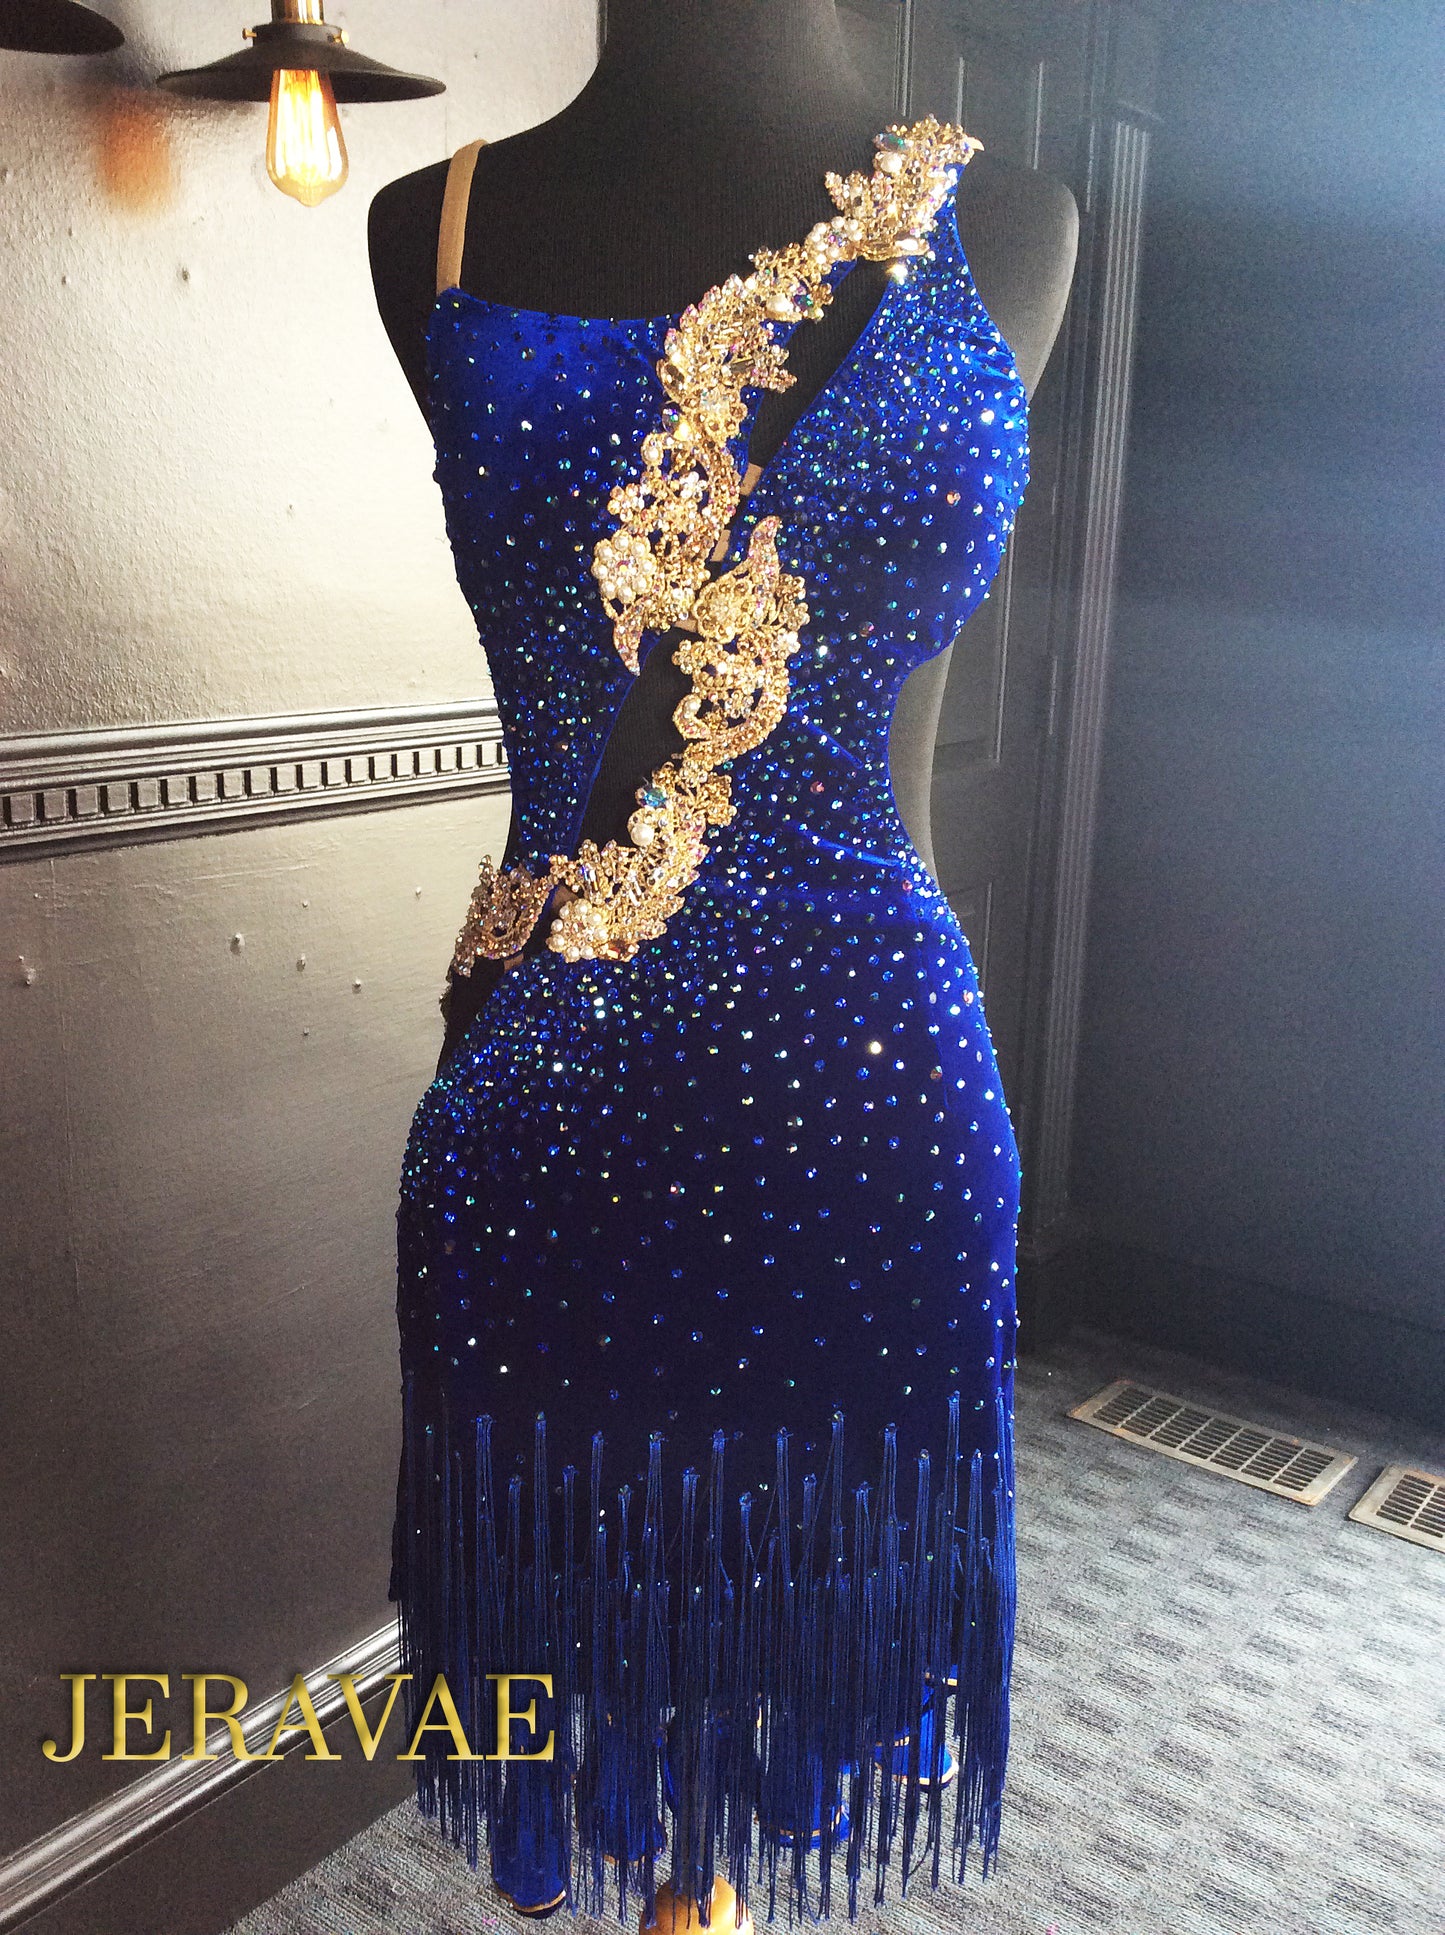 Navy Blue Latin Dress with Gold Leaf Pattern Applique and Trim.  Skirt Features Fringe and Ruffles SZ S/M Lat109